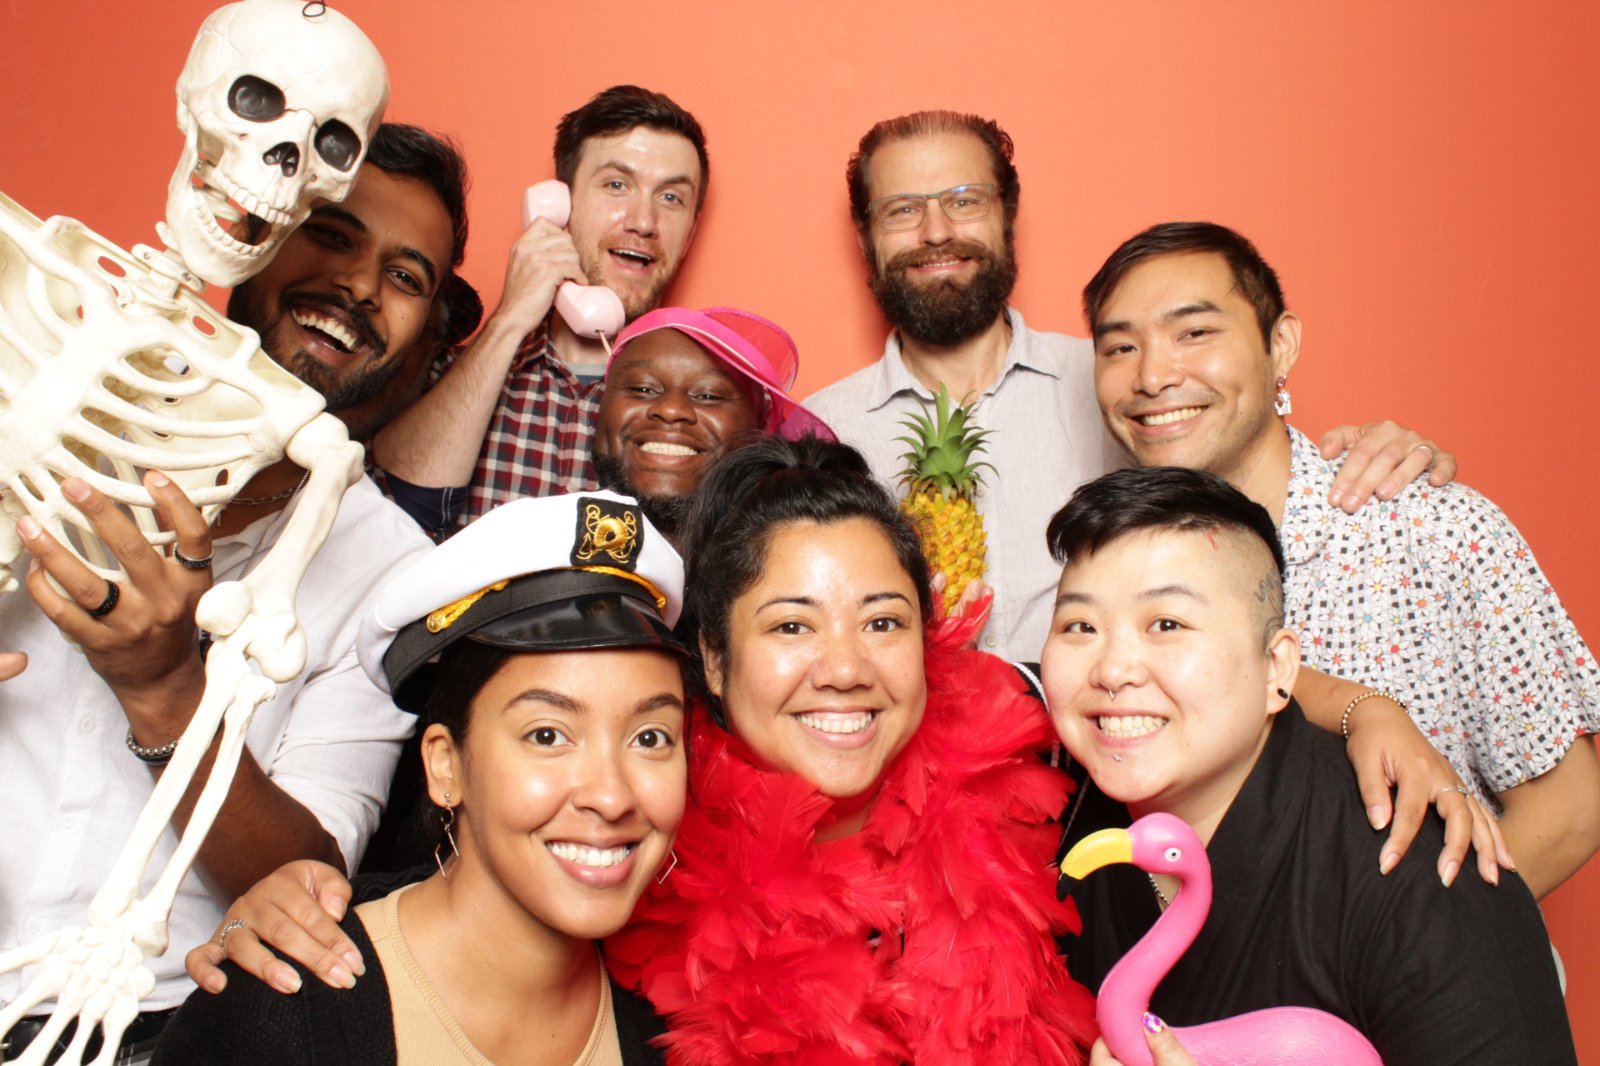 Haven Technologies employees posing for a photo with a number of silly props. On the far left, a man is holding a plastic skeleton. In the top center, one is on a corded phone, with the man on his right holding a pineapple. On the bottom left, a woman is wearing a captain's hat. The woman next to her is in a pink feather boa, and the person on that woman's right is holding a prop flamingo.